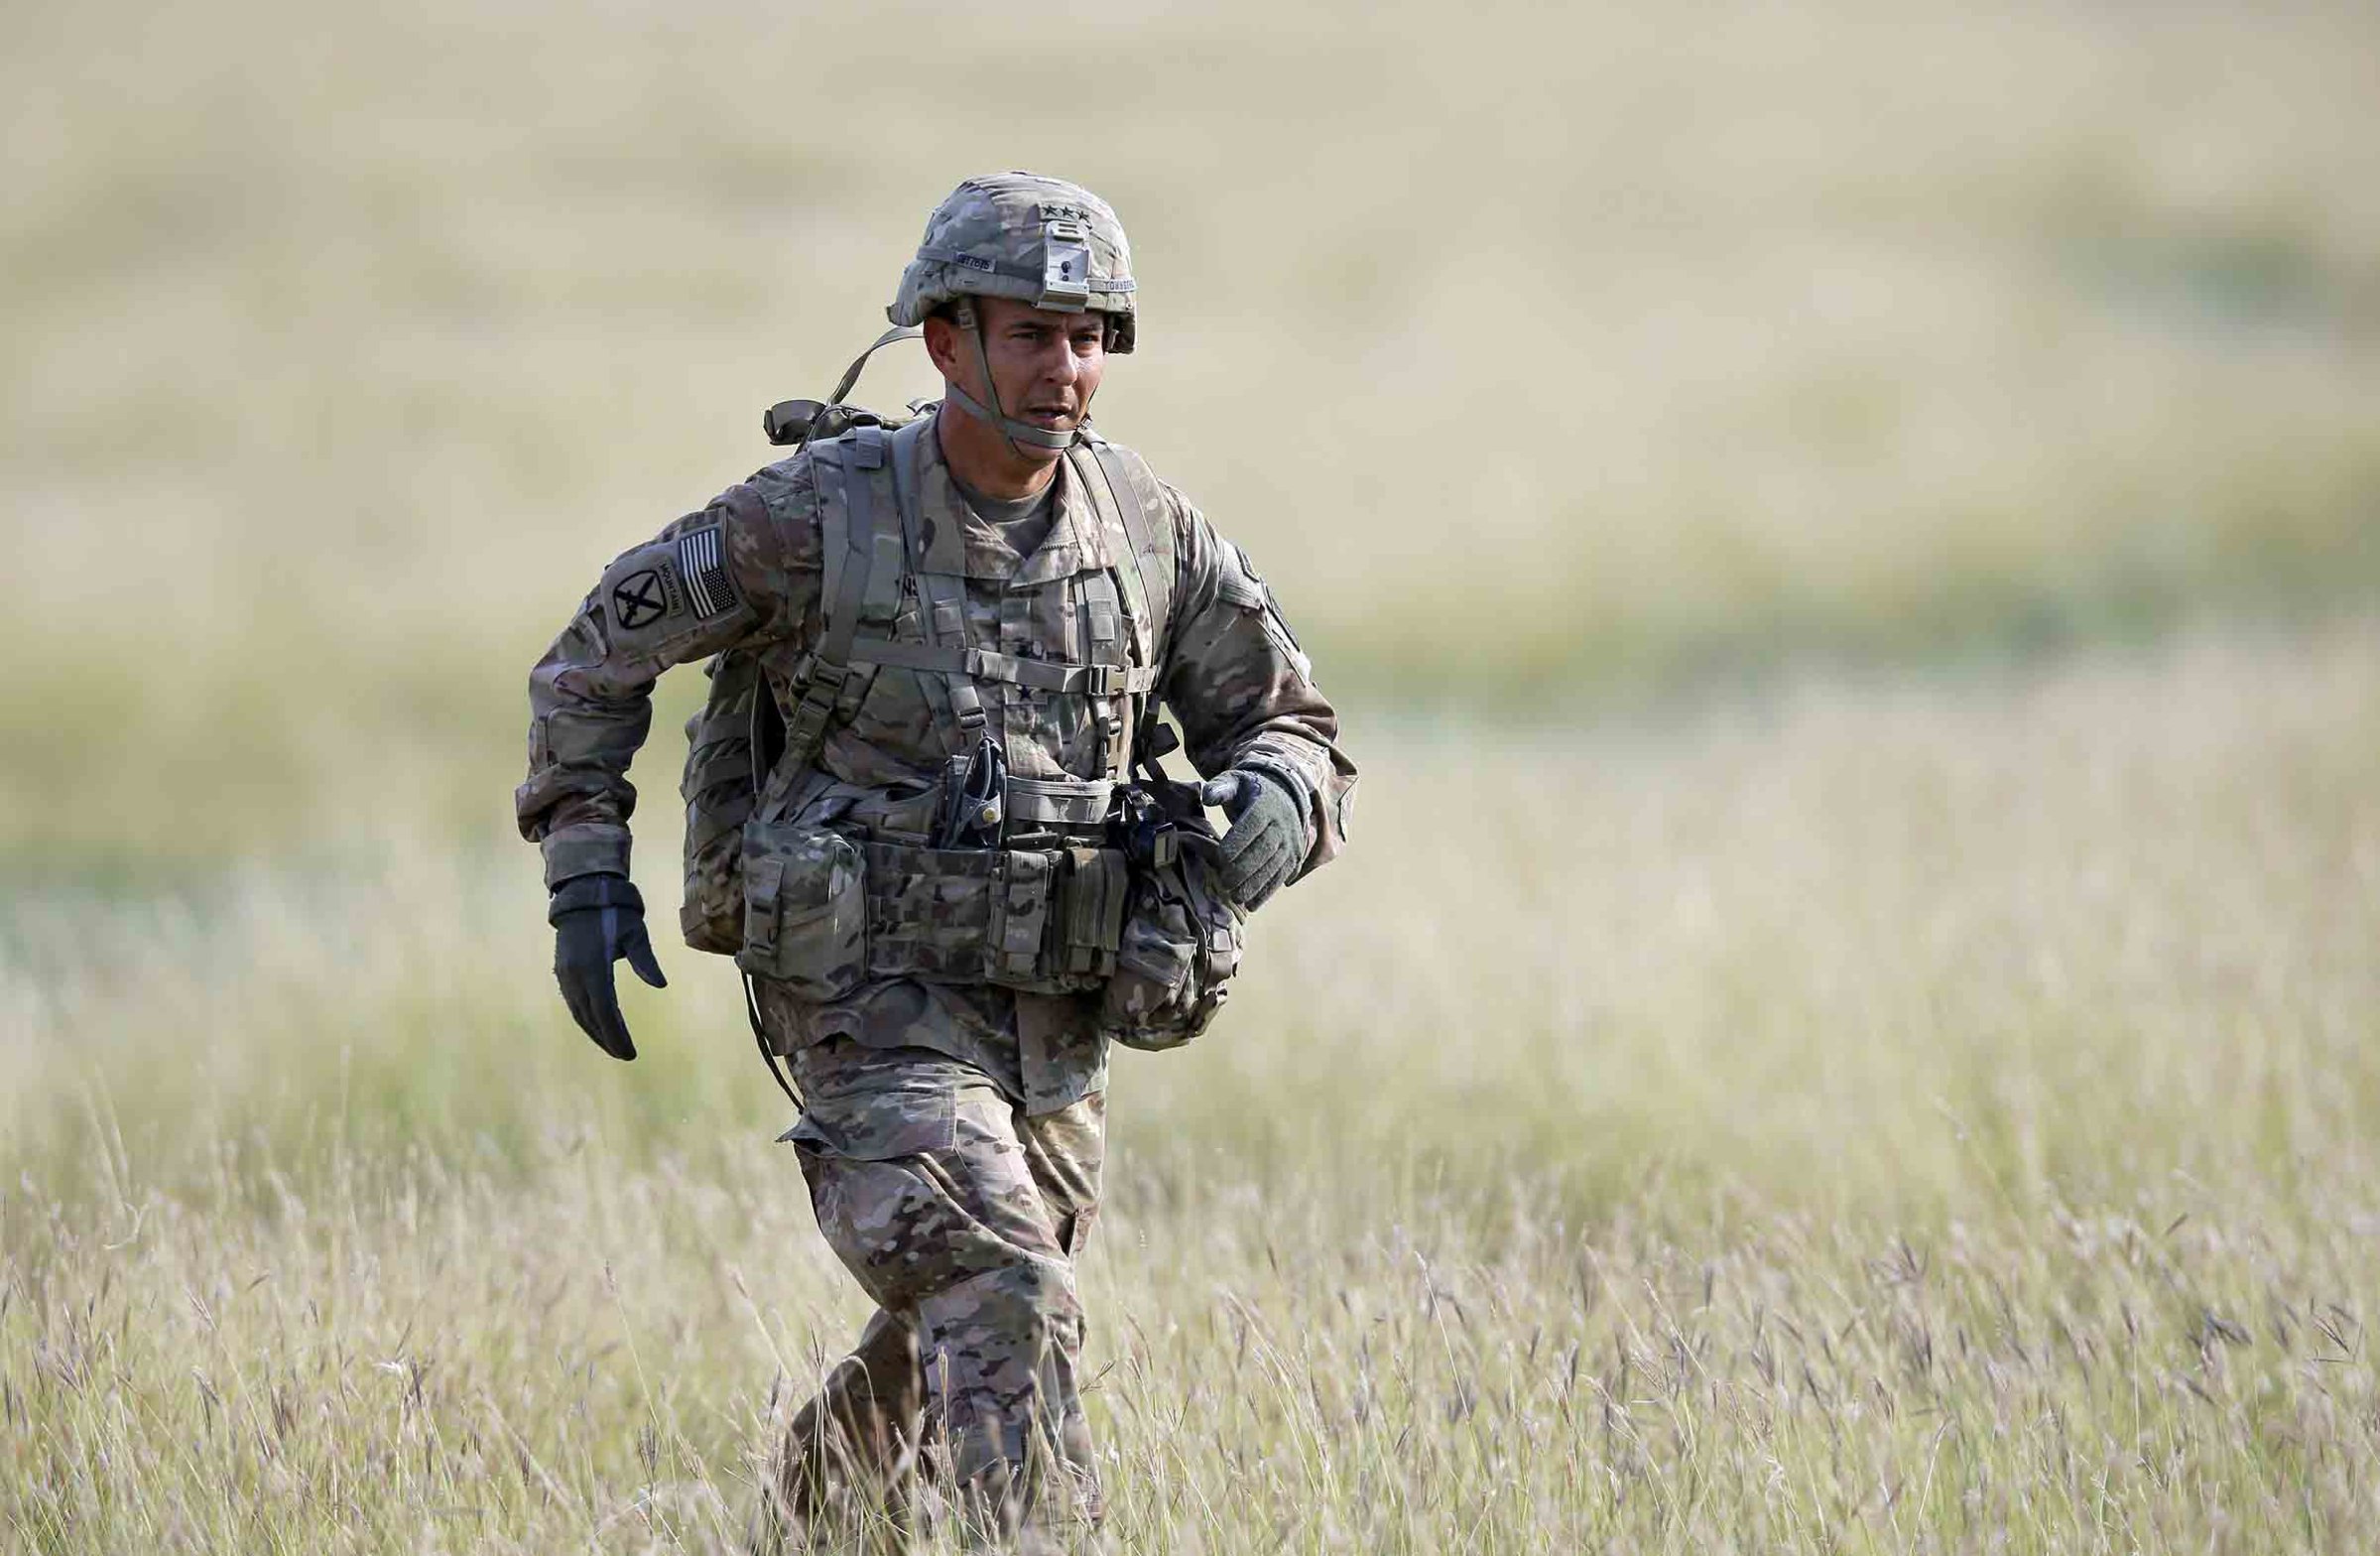 Maj. Gen. Stephen J. Townsend, the commander of the 18th Airborne Corps, runs towards the media working area during an US Army-led airborne assault exercise named 'Swift Response 15', held at Smardan shooting range, 260 kilometers north-east of Bucharest, Romania, Aug. 26 2015.